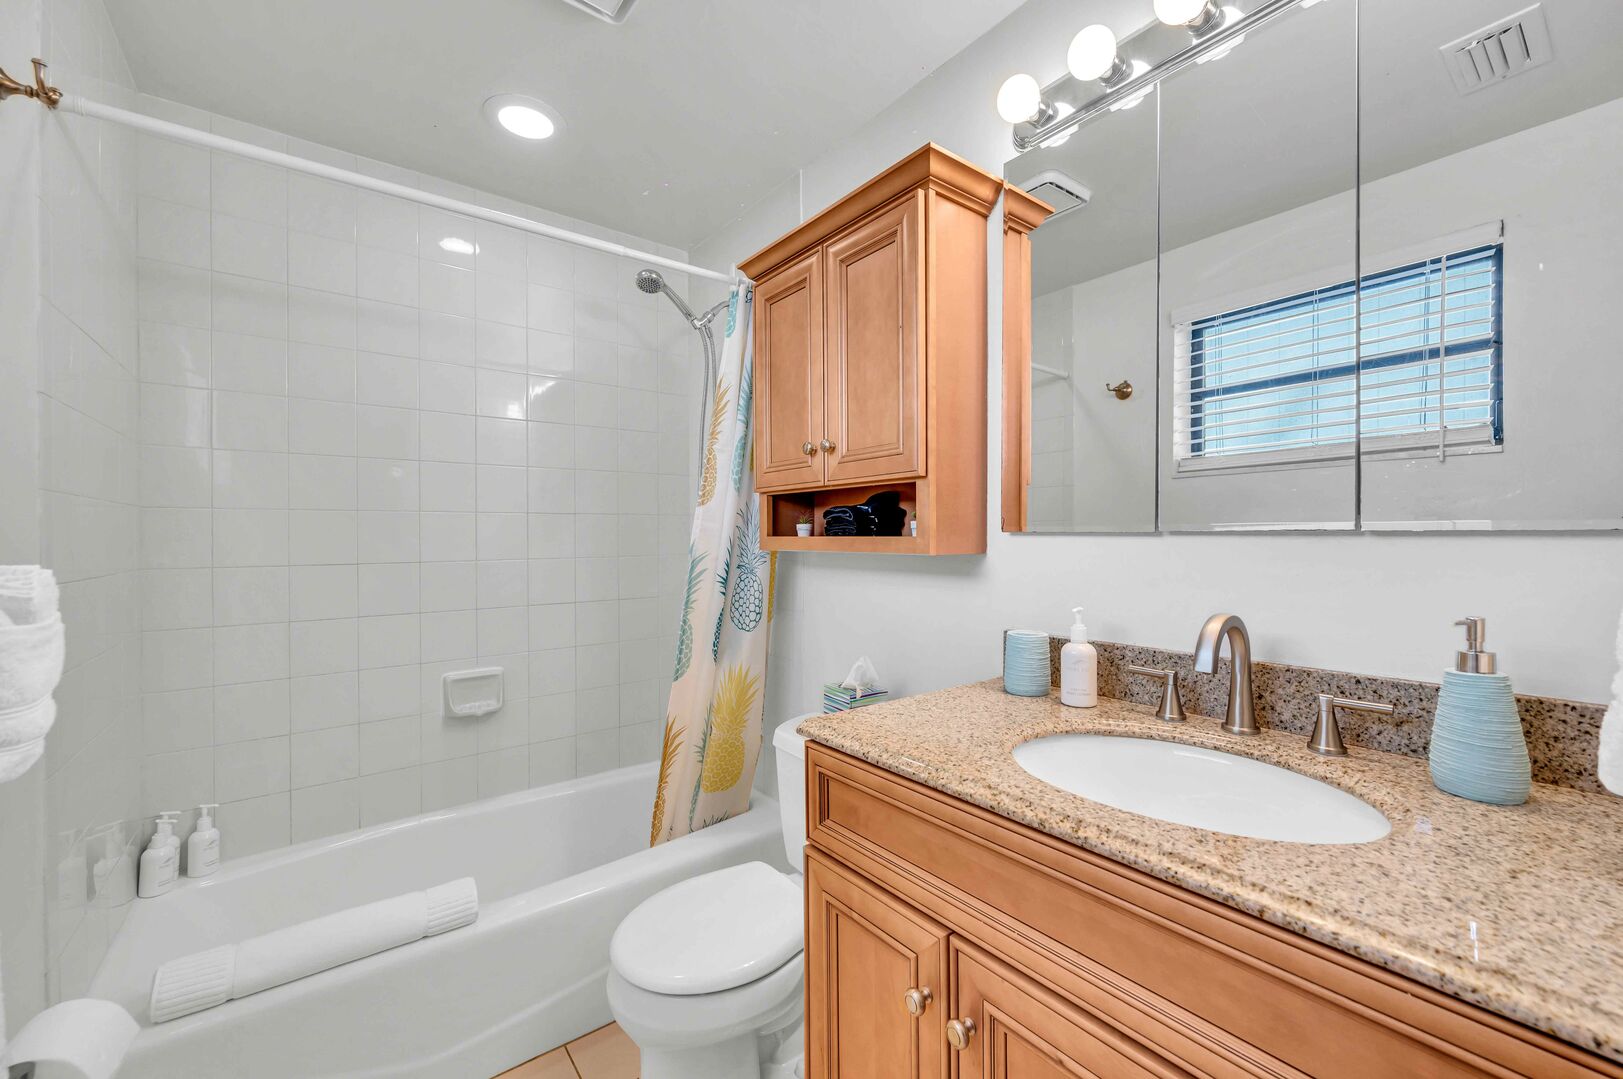 The bathroom has all the needed amenities, including tub/shower combo